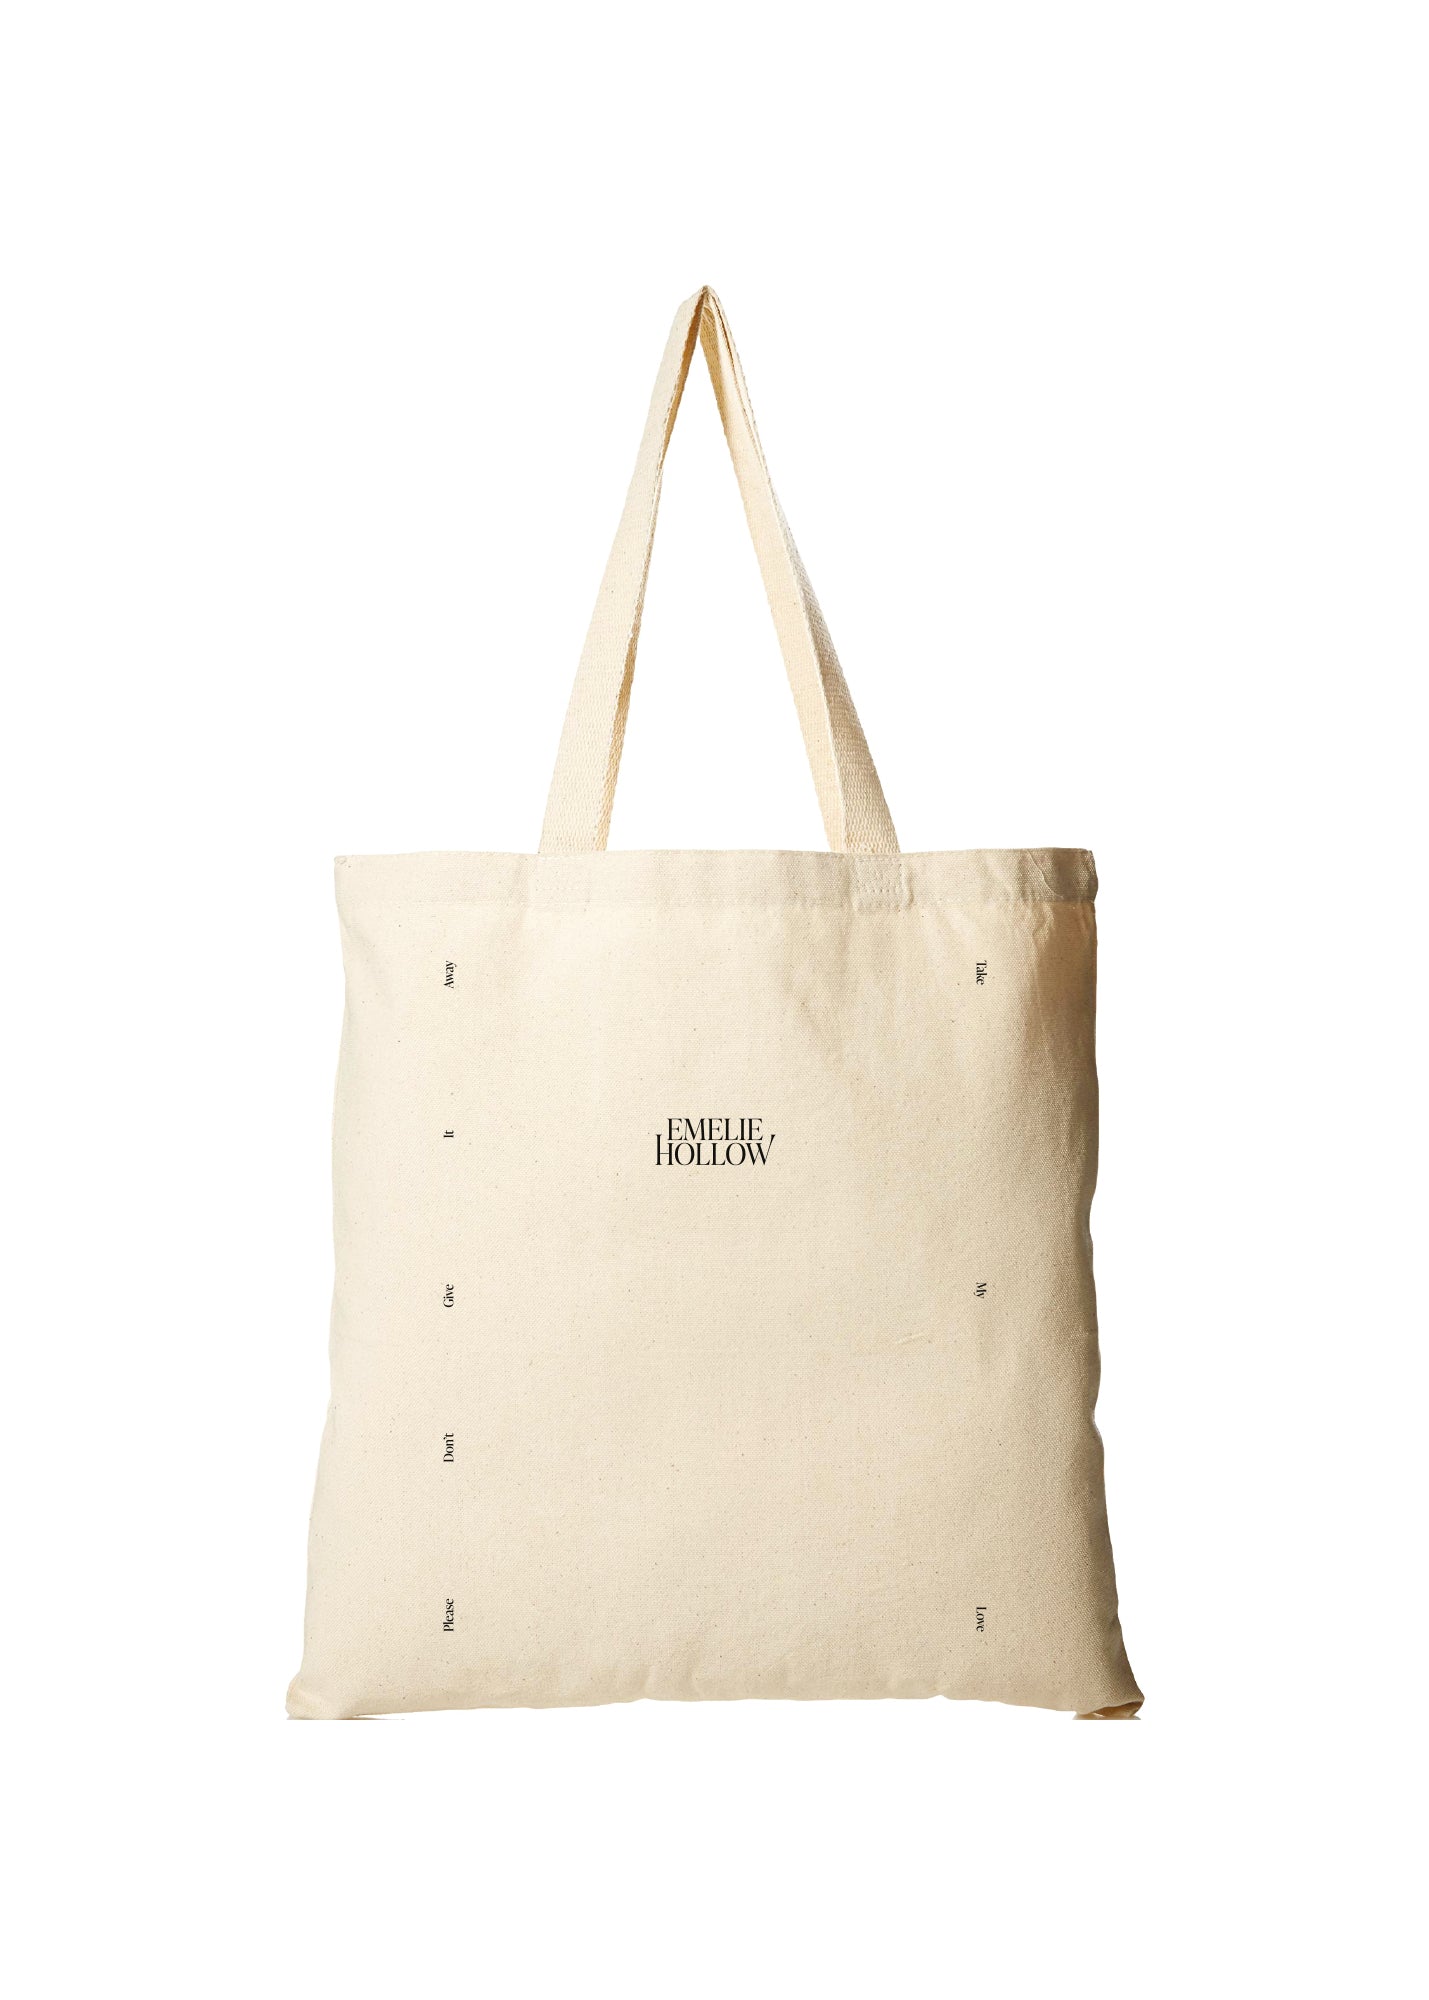 Emelie Hollow - Take My Love - Tote